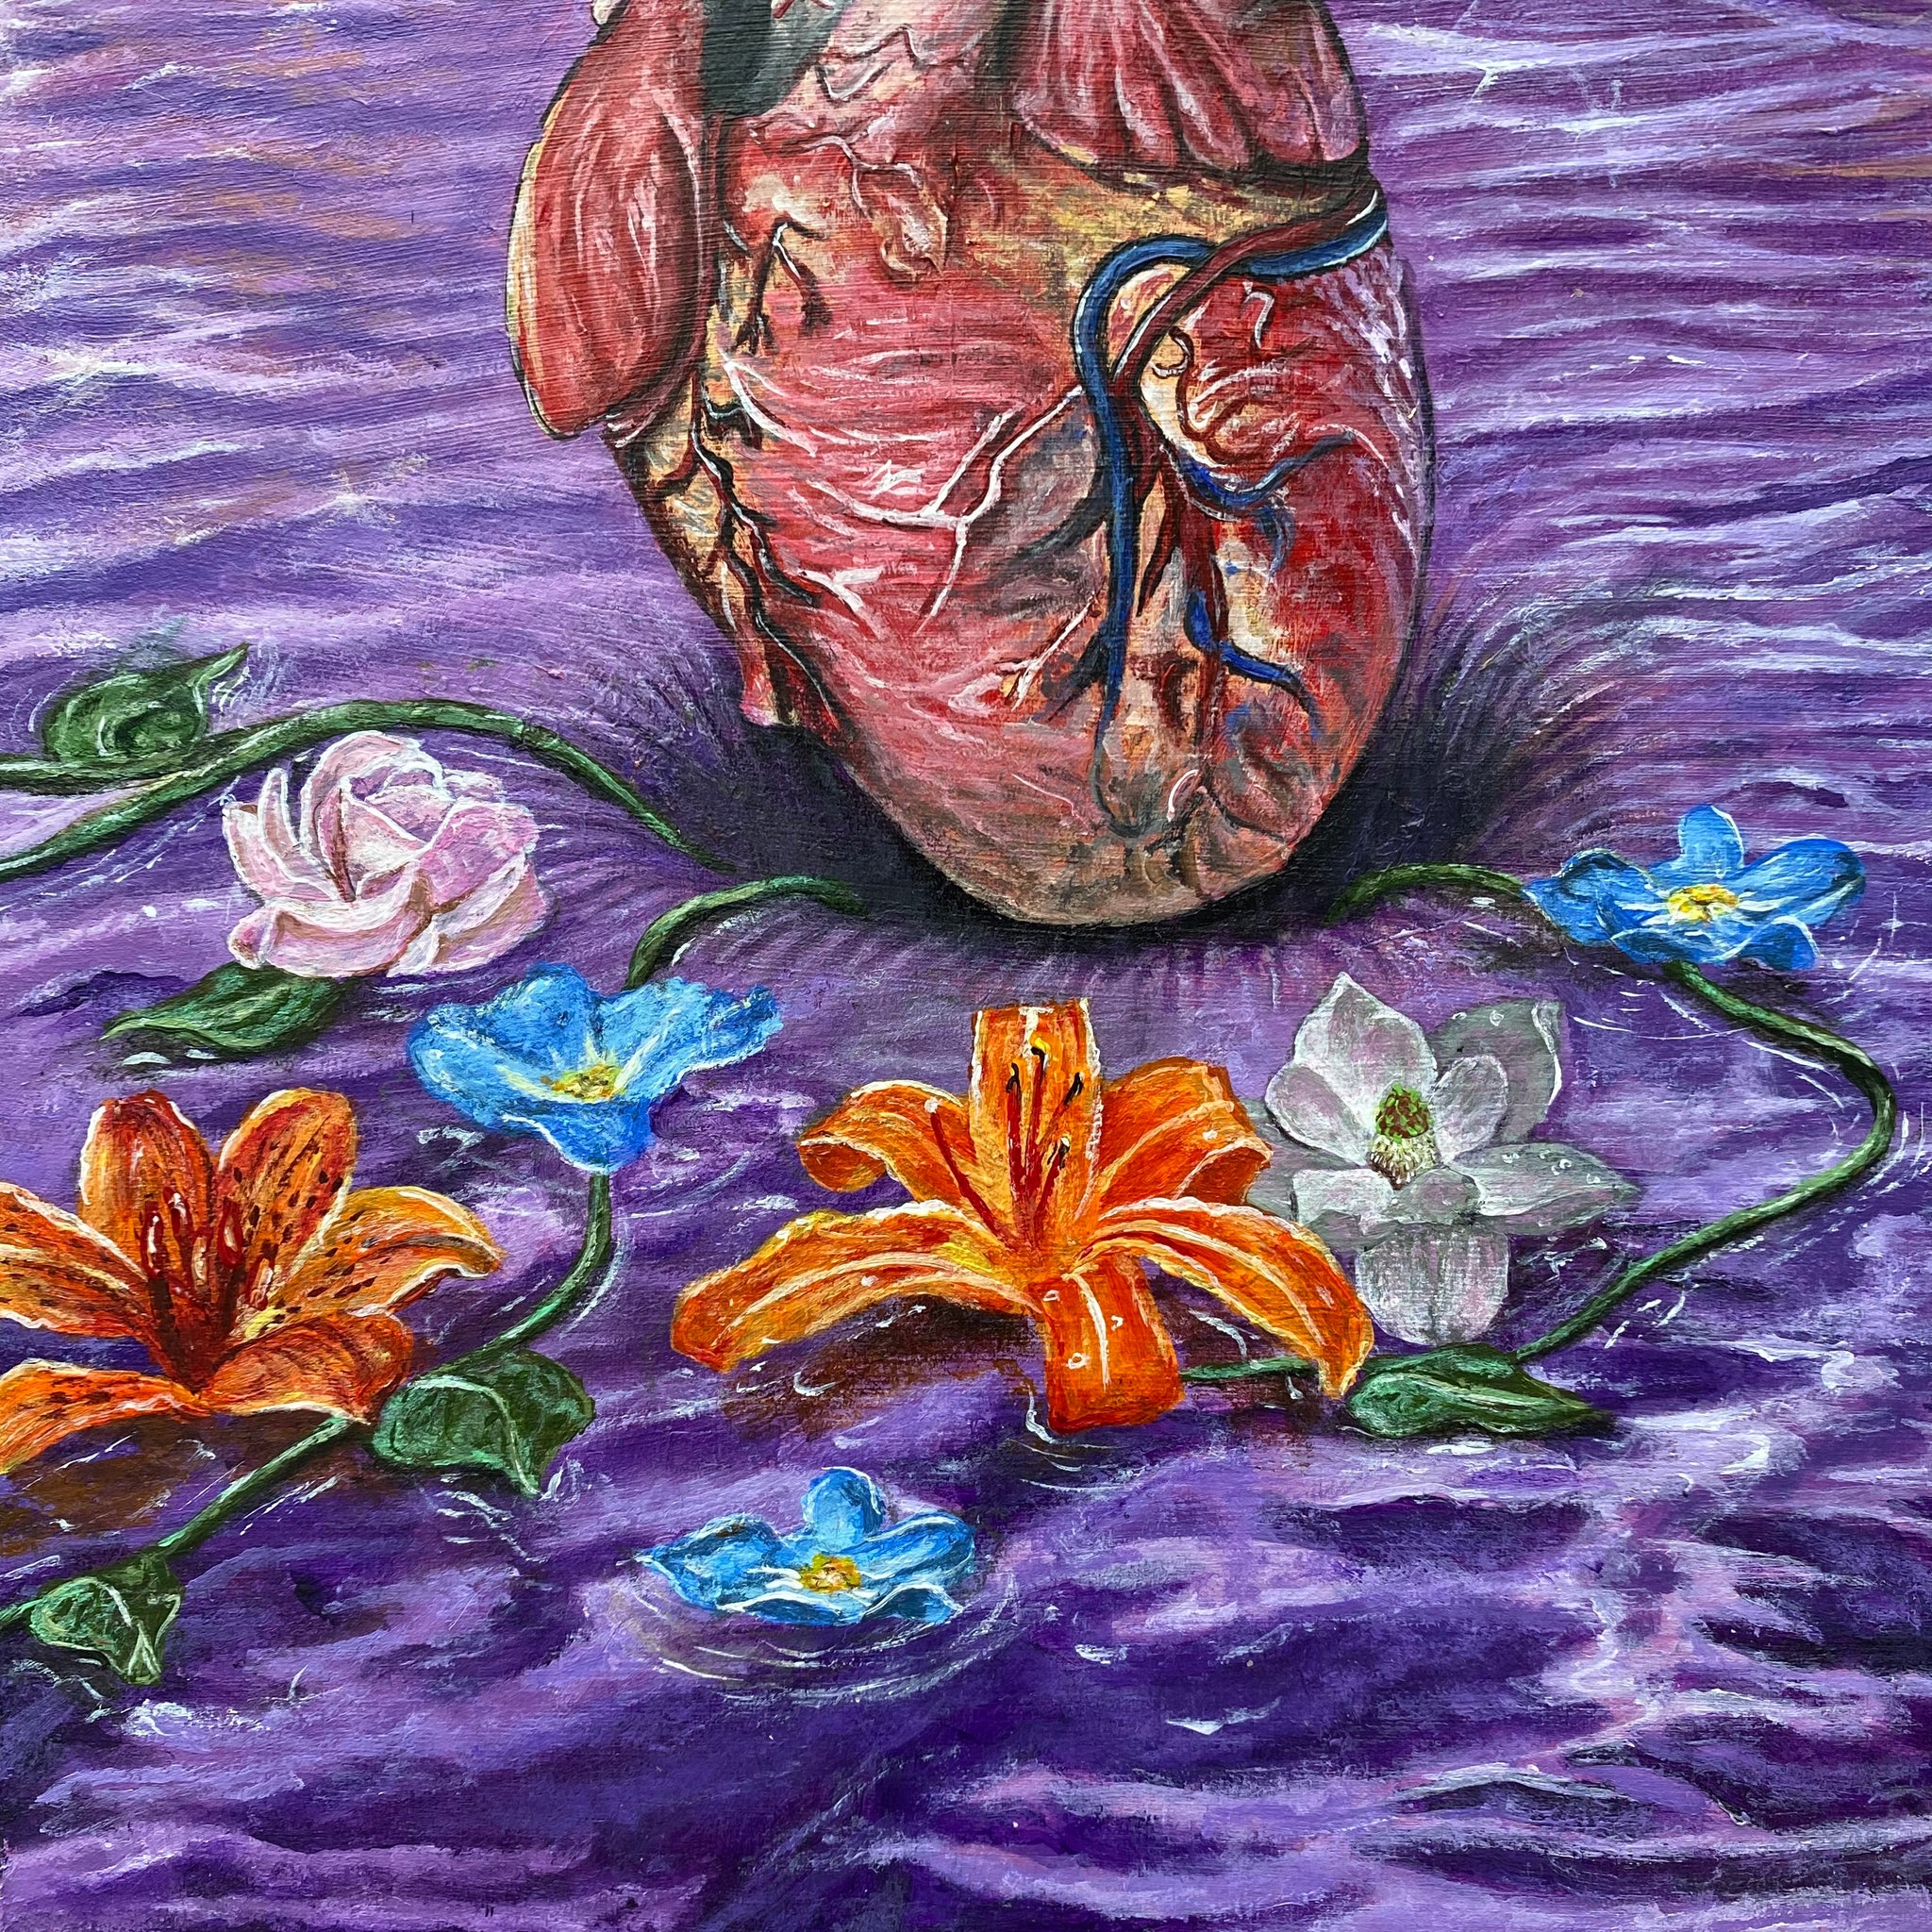 The journey of self-reflection to purify the heart Original painting